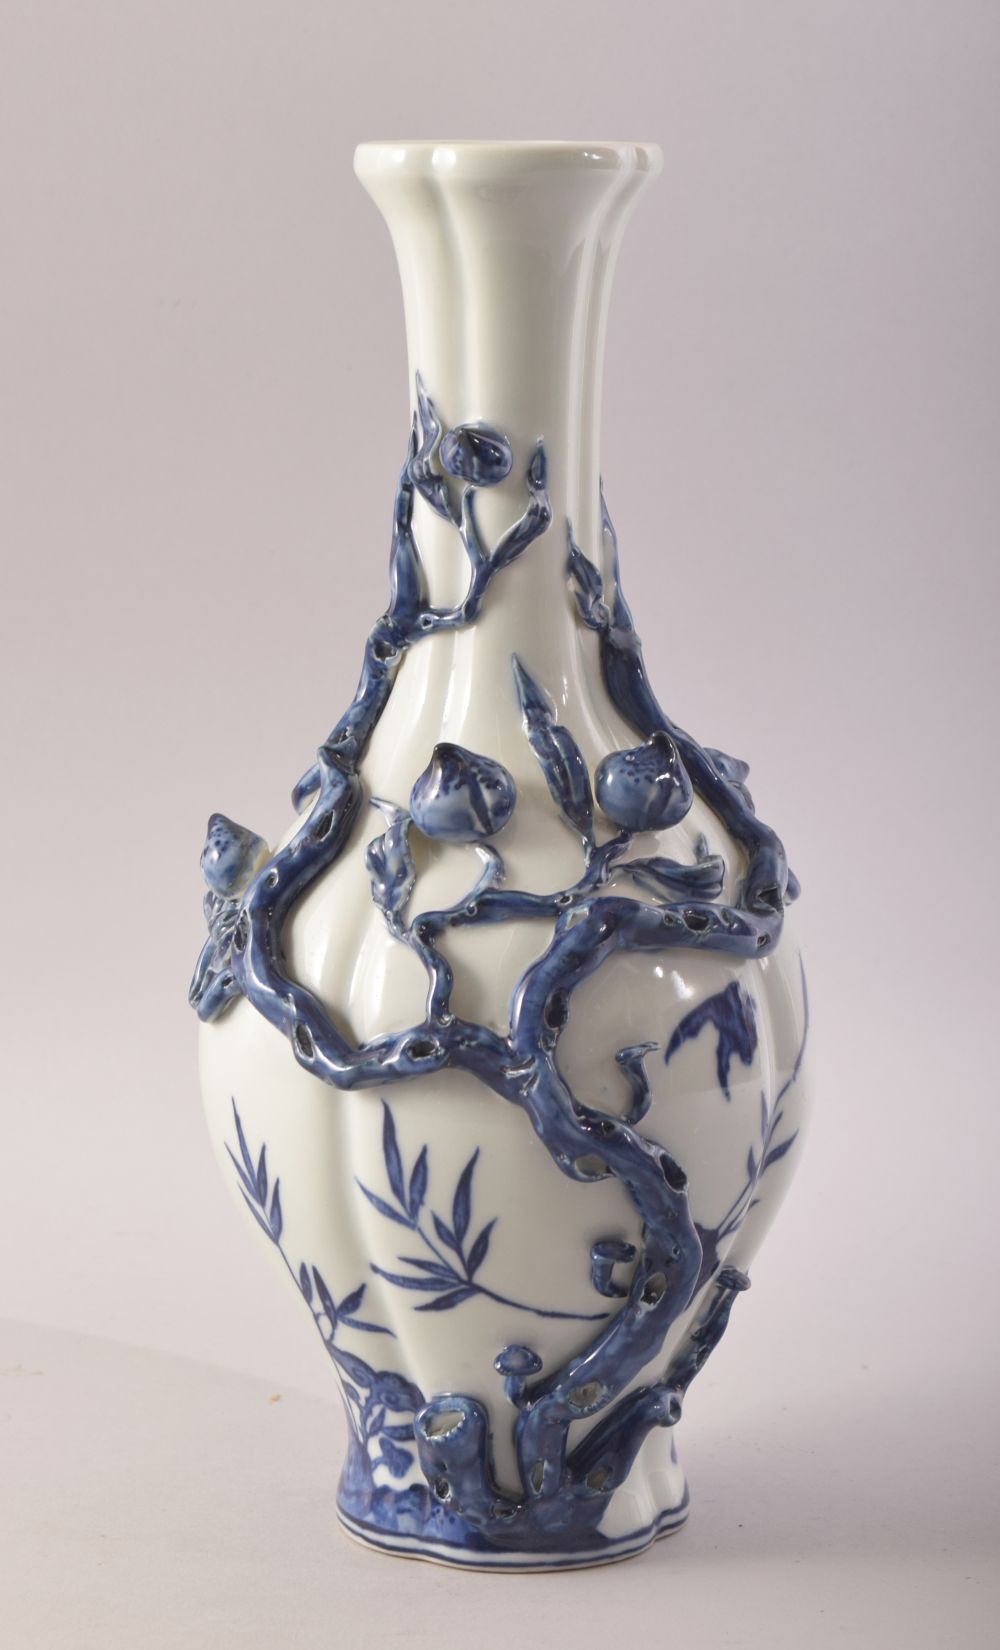 A CHINESE BLUE AND WHITE PORCELAIN VASE, with moulded relief peach tree decoration, the body with